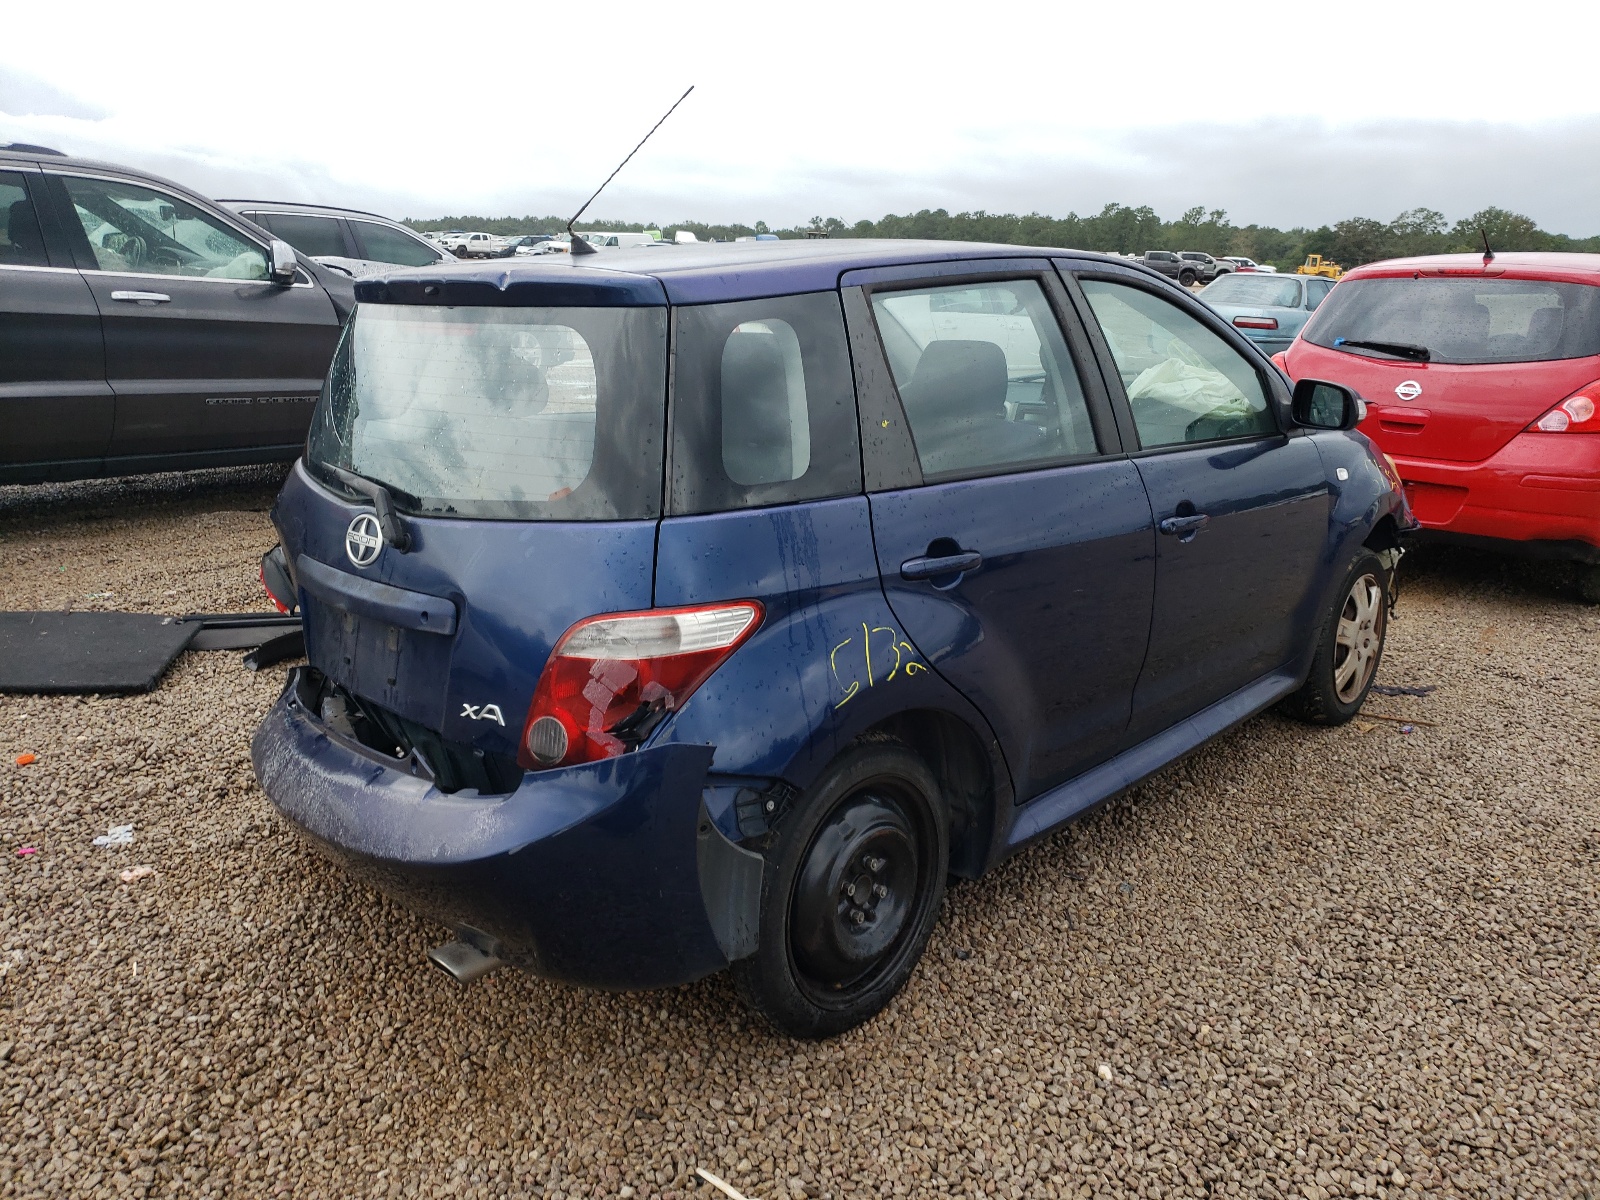 JTKKT624260****** Salvage and Wrecked 2006 Scion xA in Alabama State